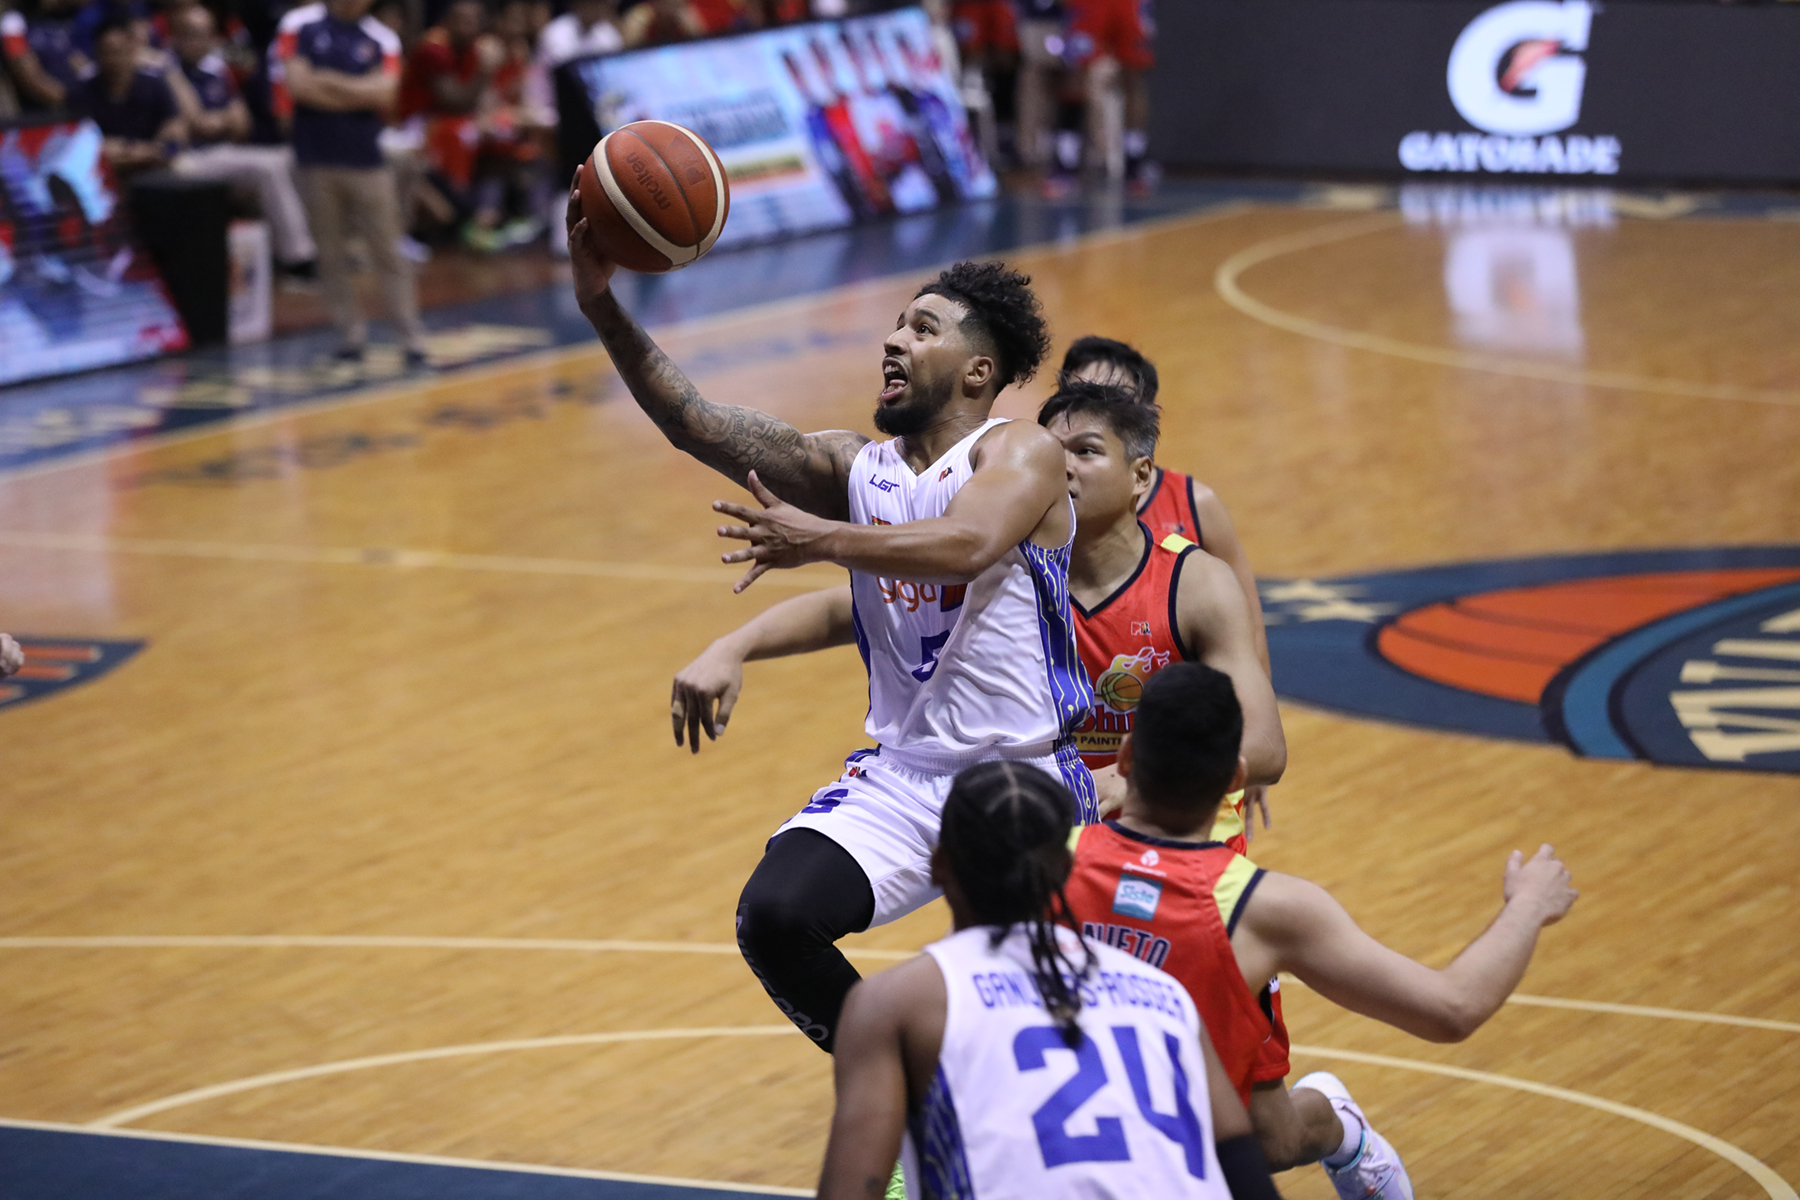 TNT stays spotless; Blackwater gets 1st win in Govs’ Cup